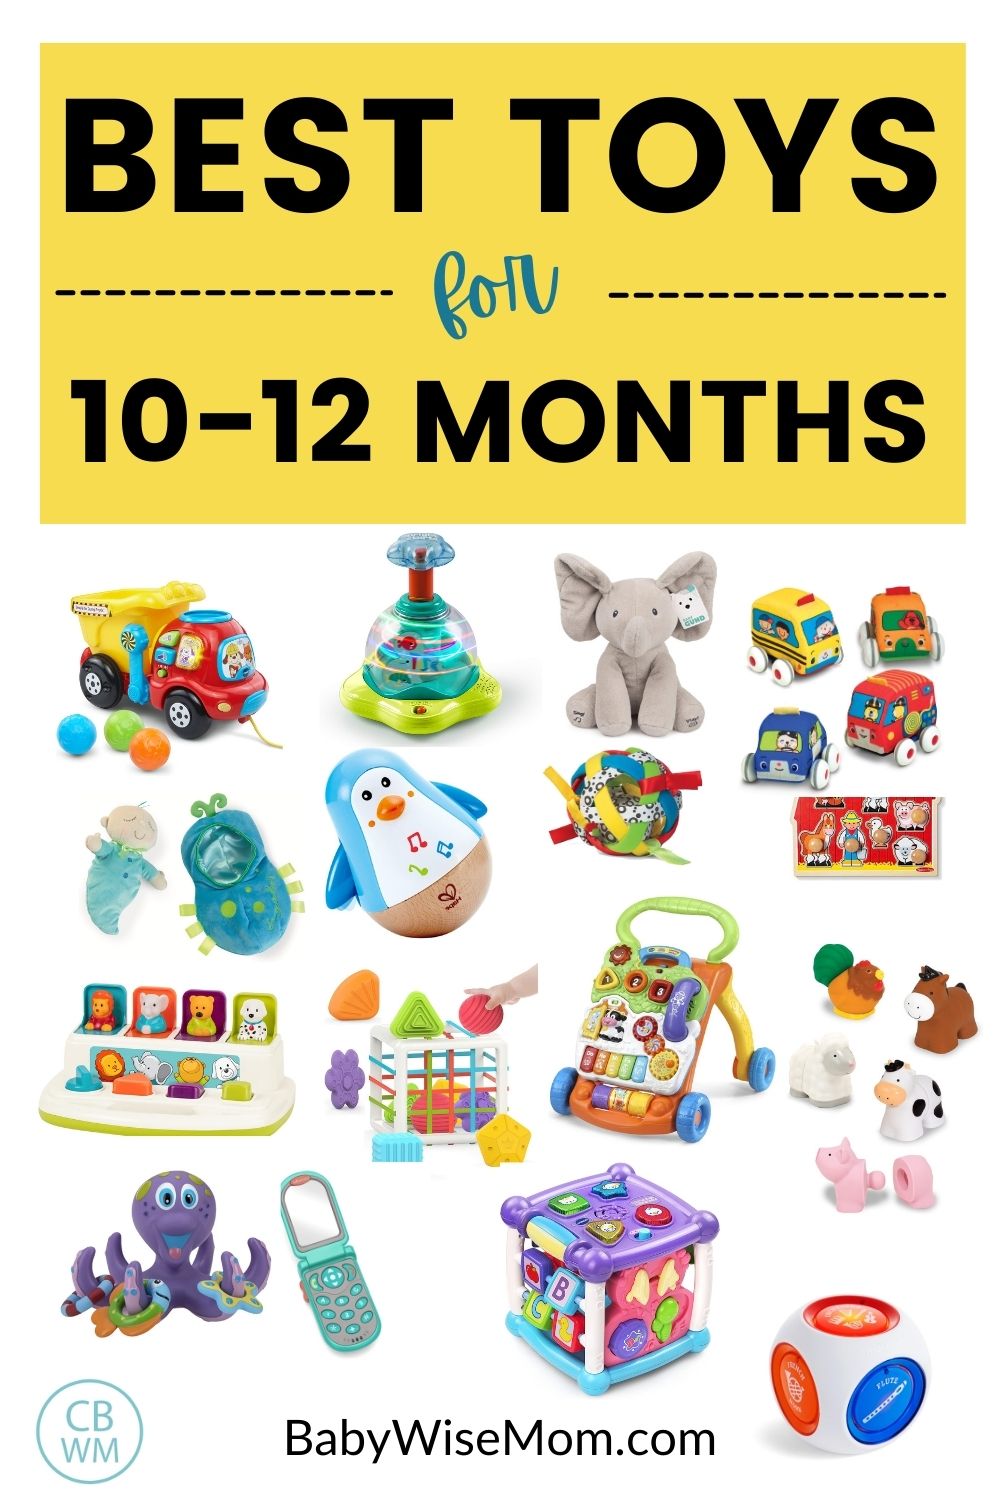 Best toys for 10-12 month olds pinnable image